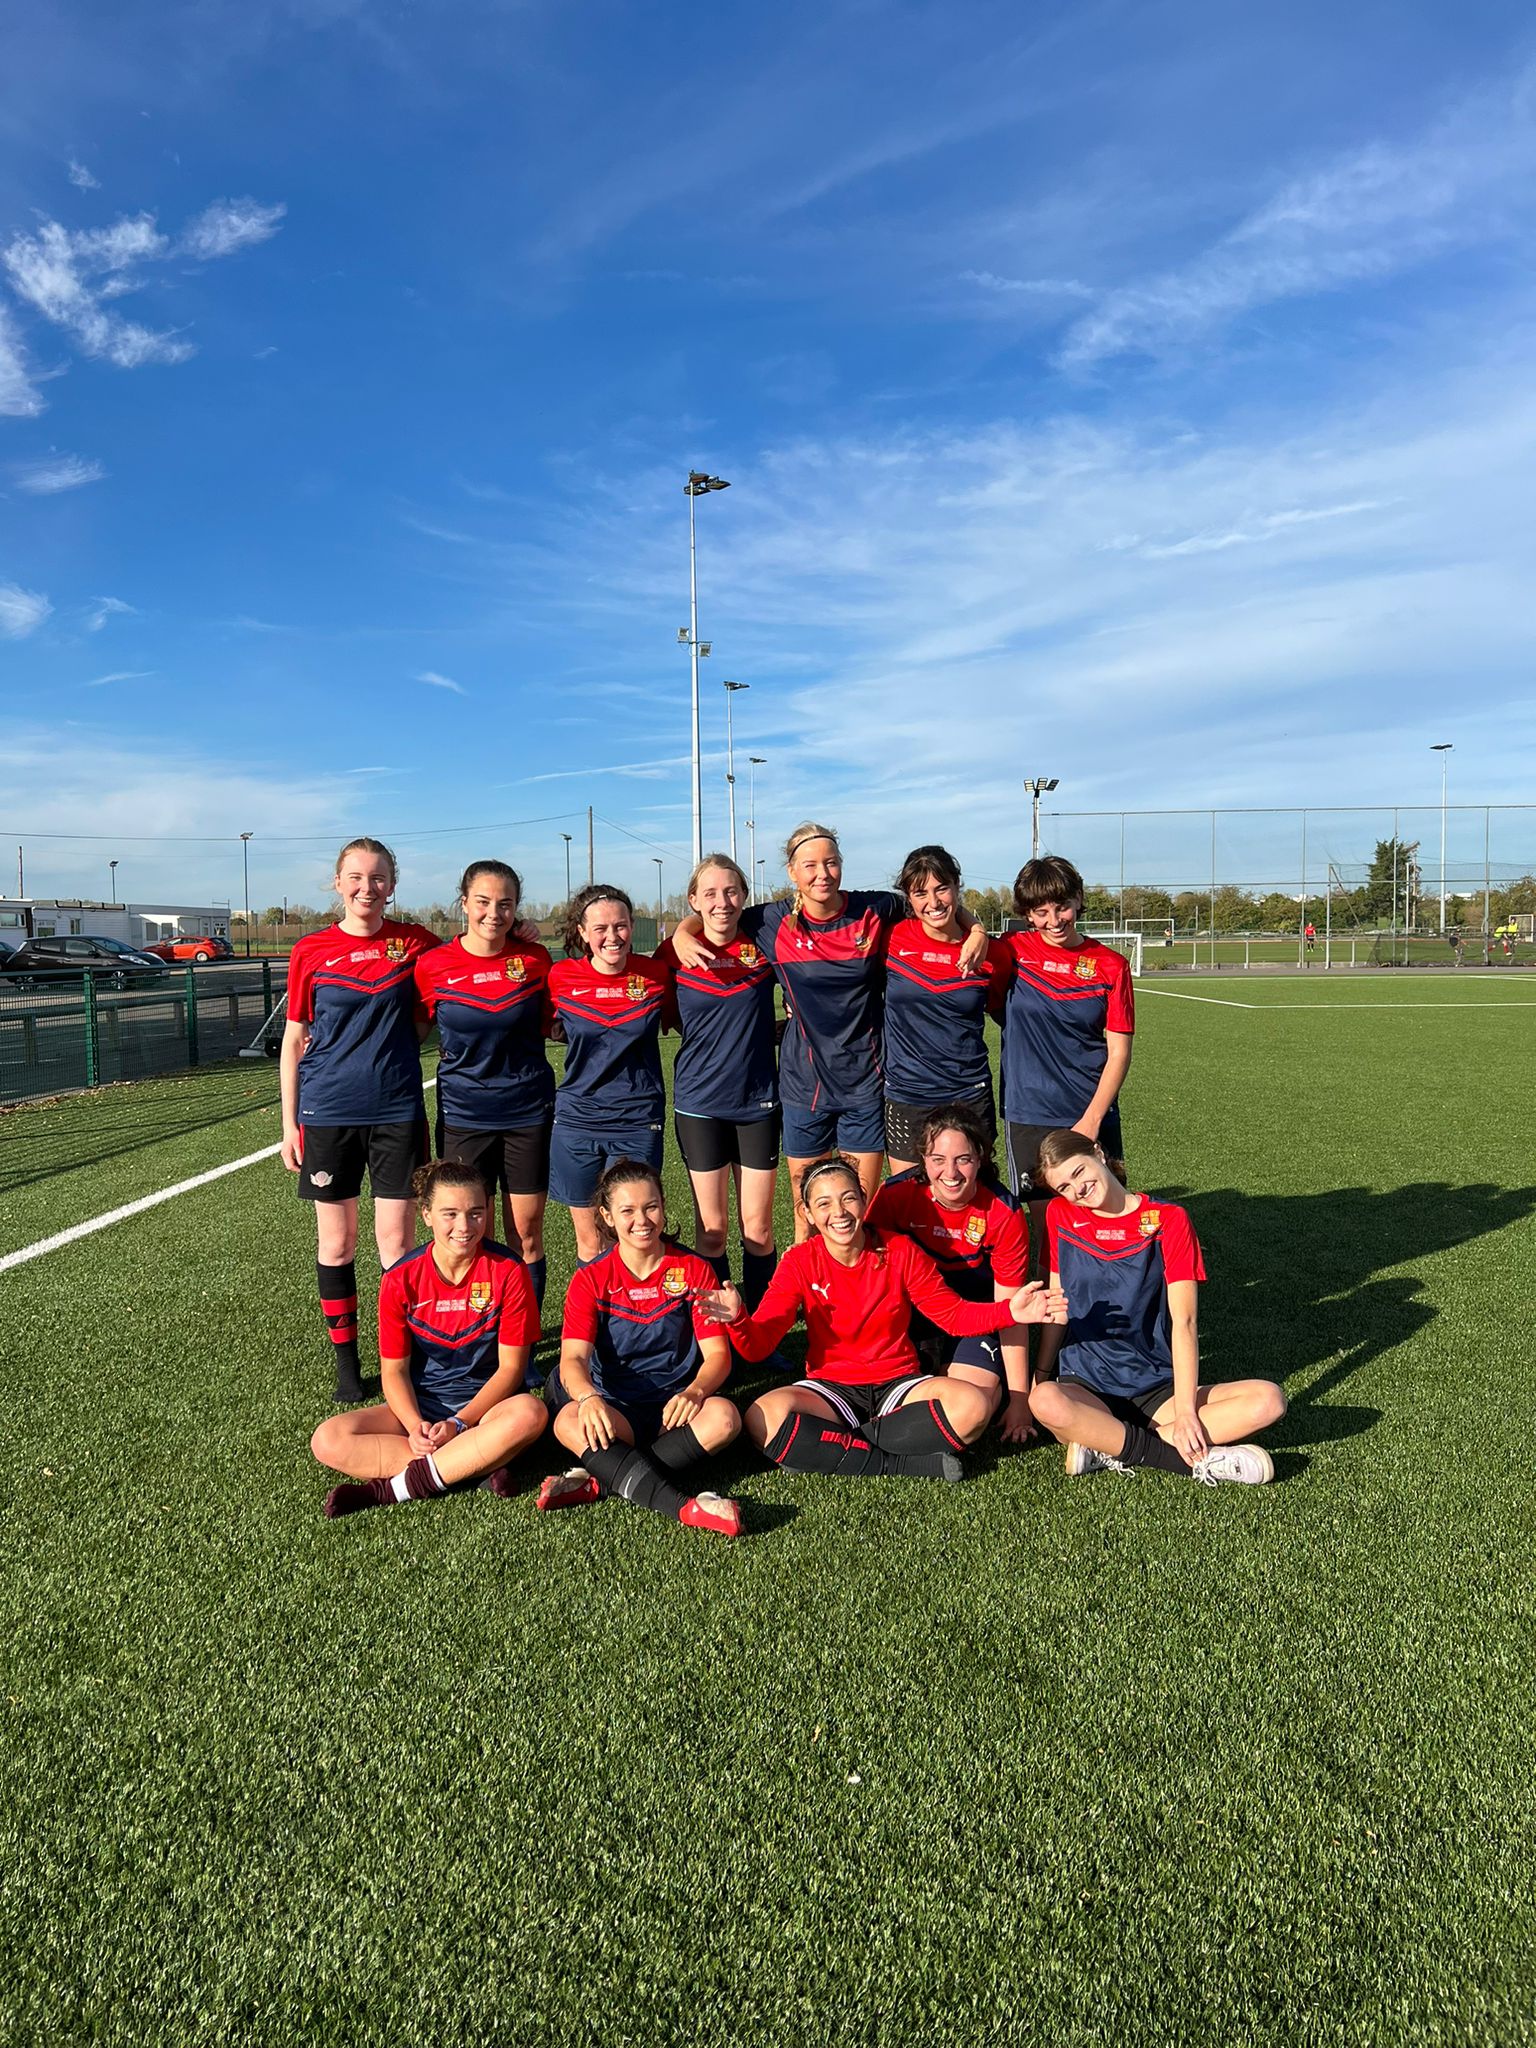 Players at Imperial College London women's football team standing together on the pitch 